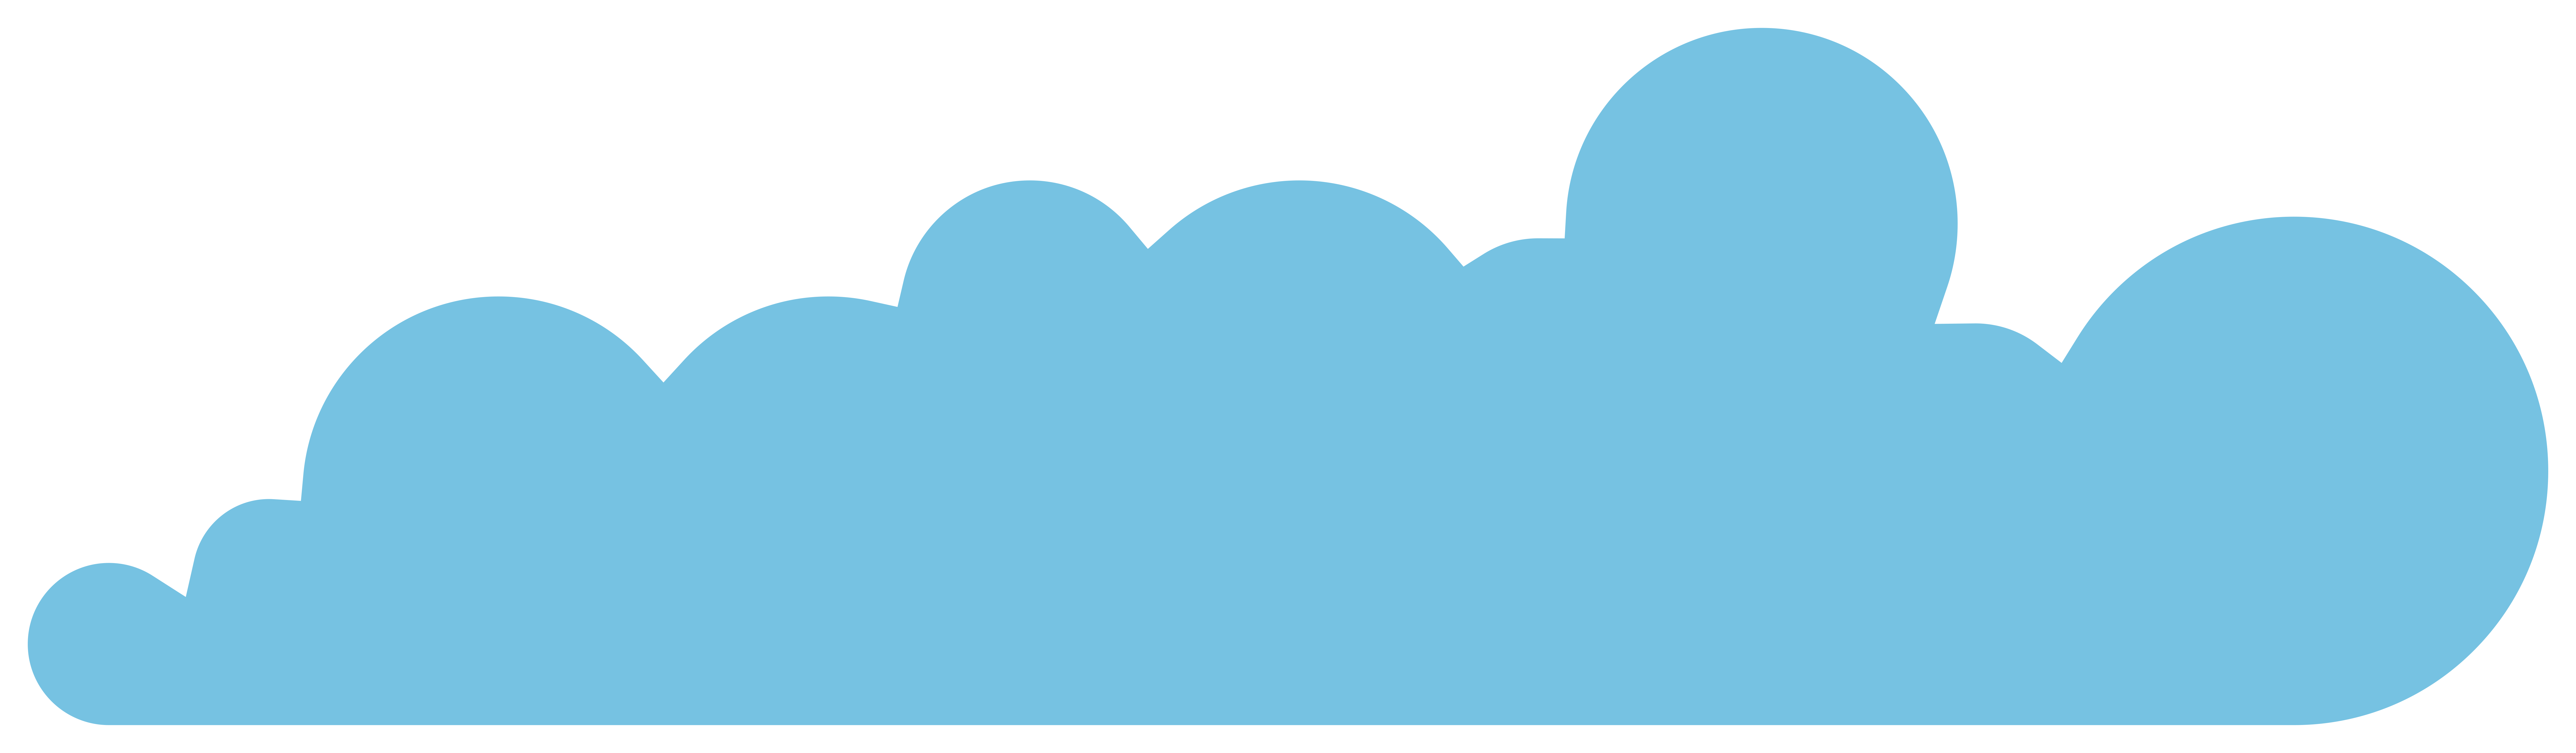 vecteezy_cloud-icon-in-flat-style_22093824_493